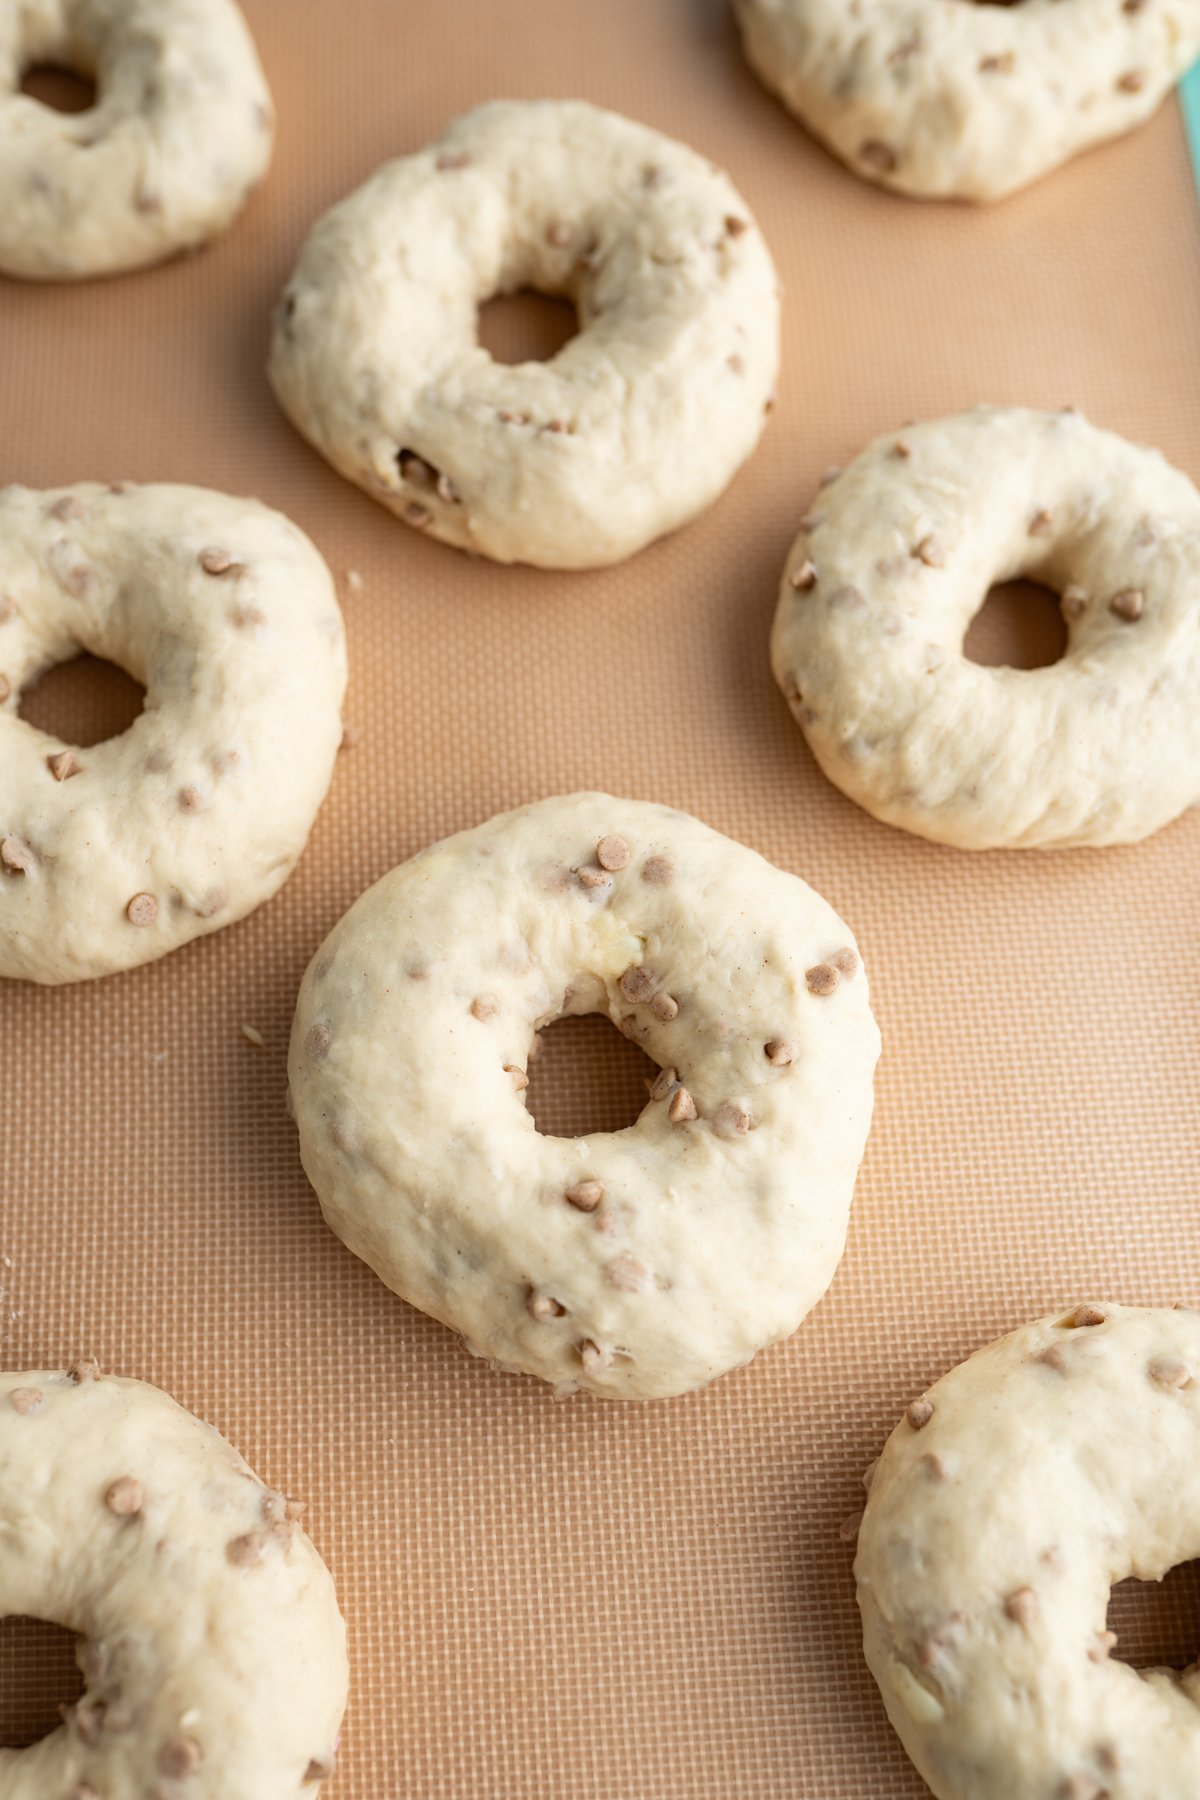 Cinnamon crunch bagels after rising prior to being baked. 